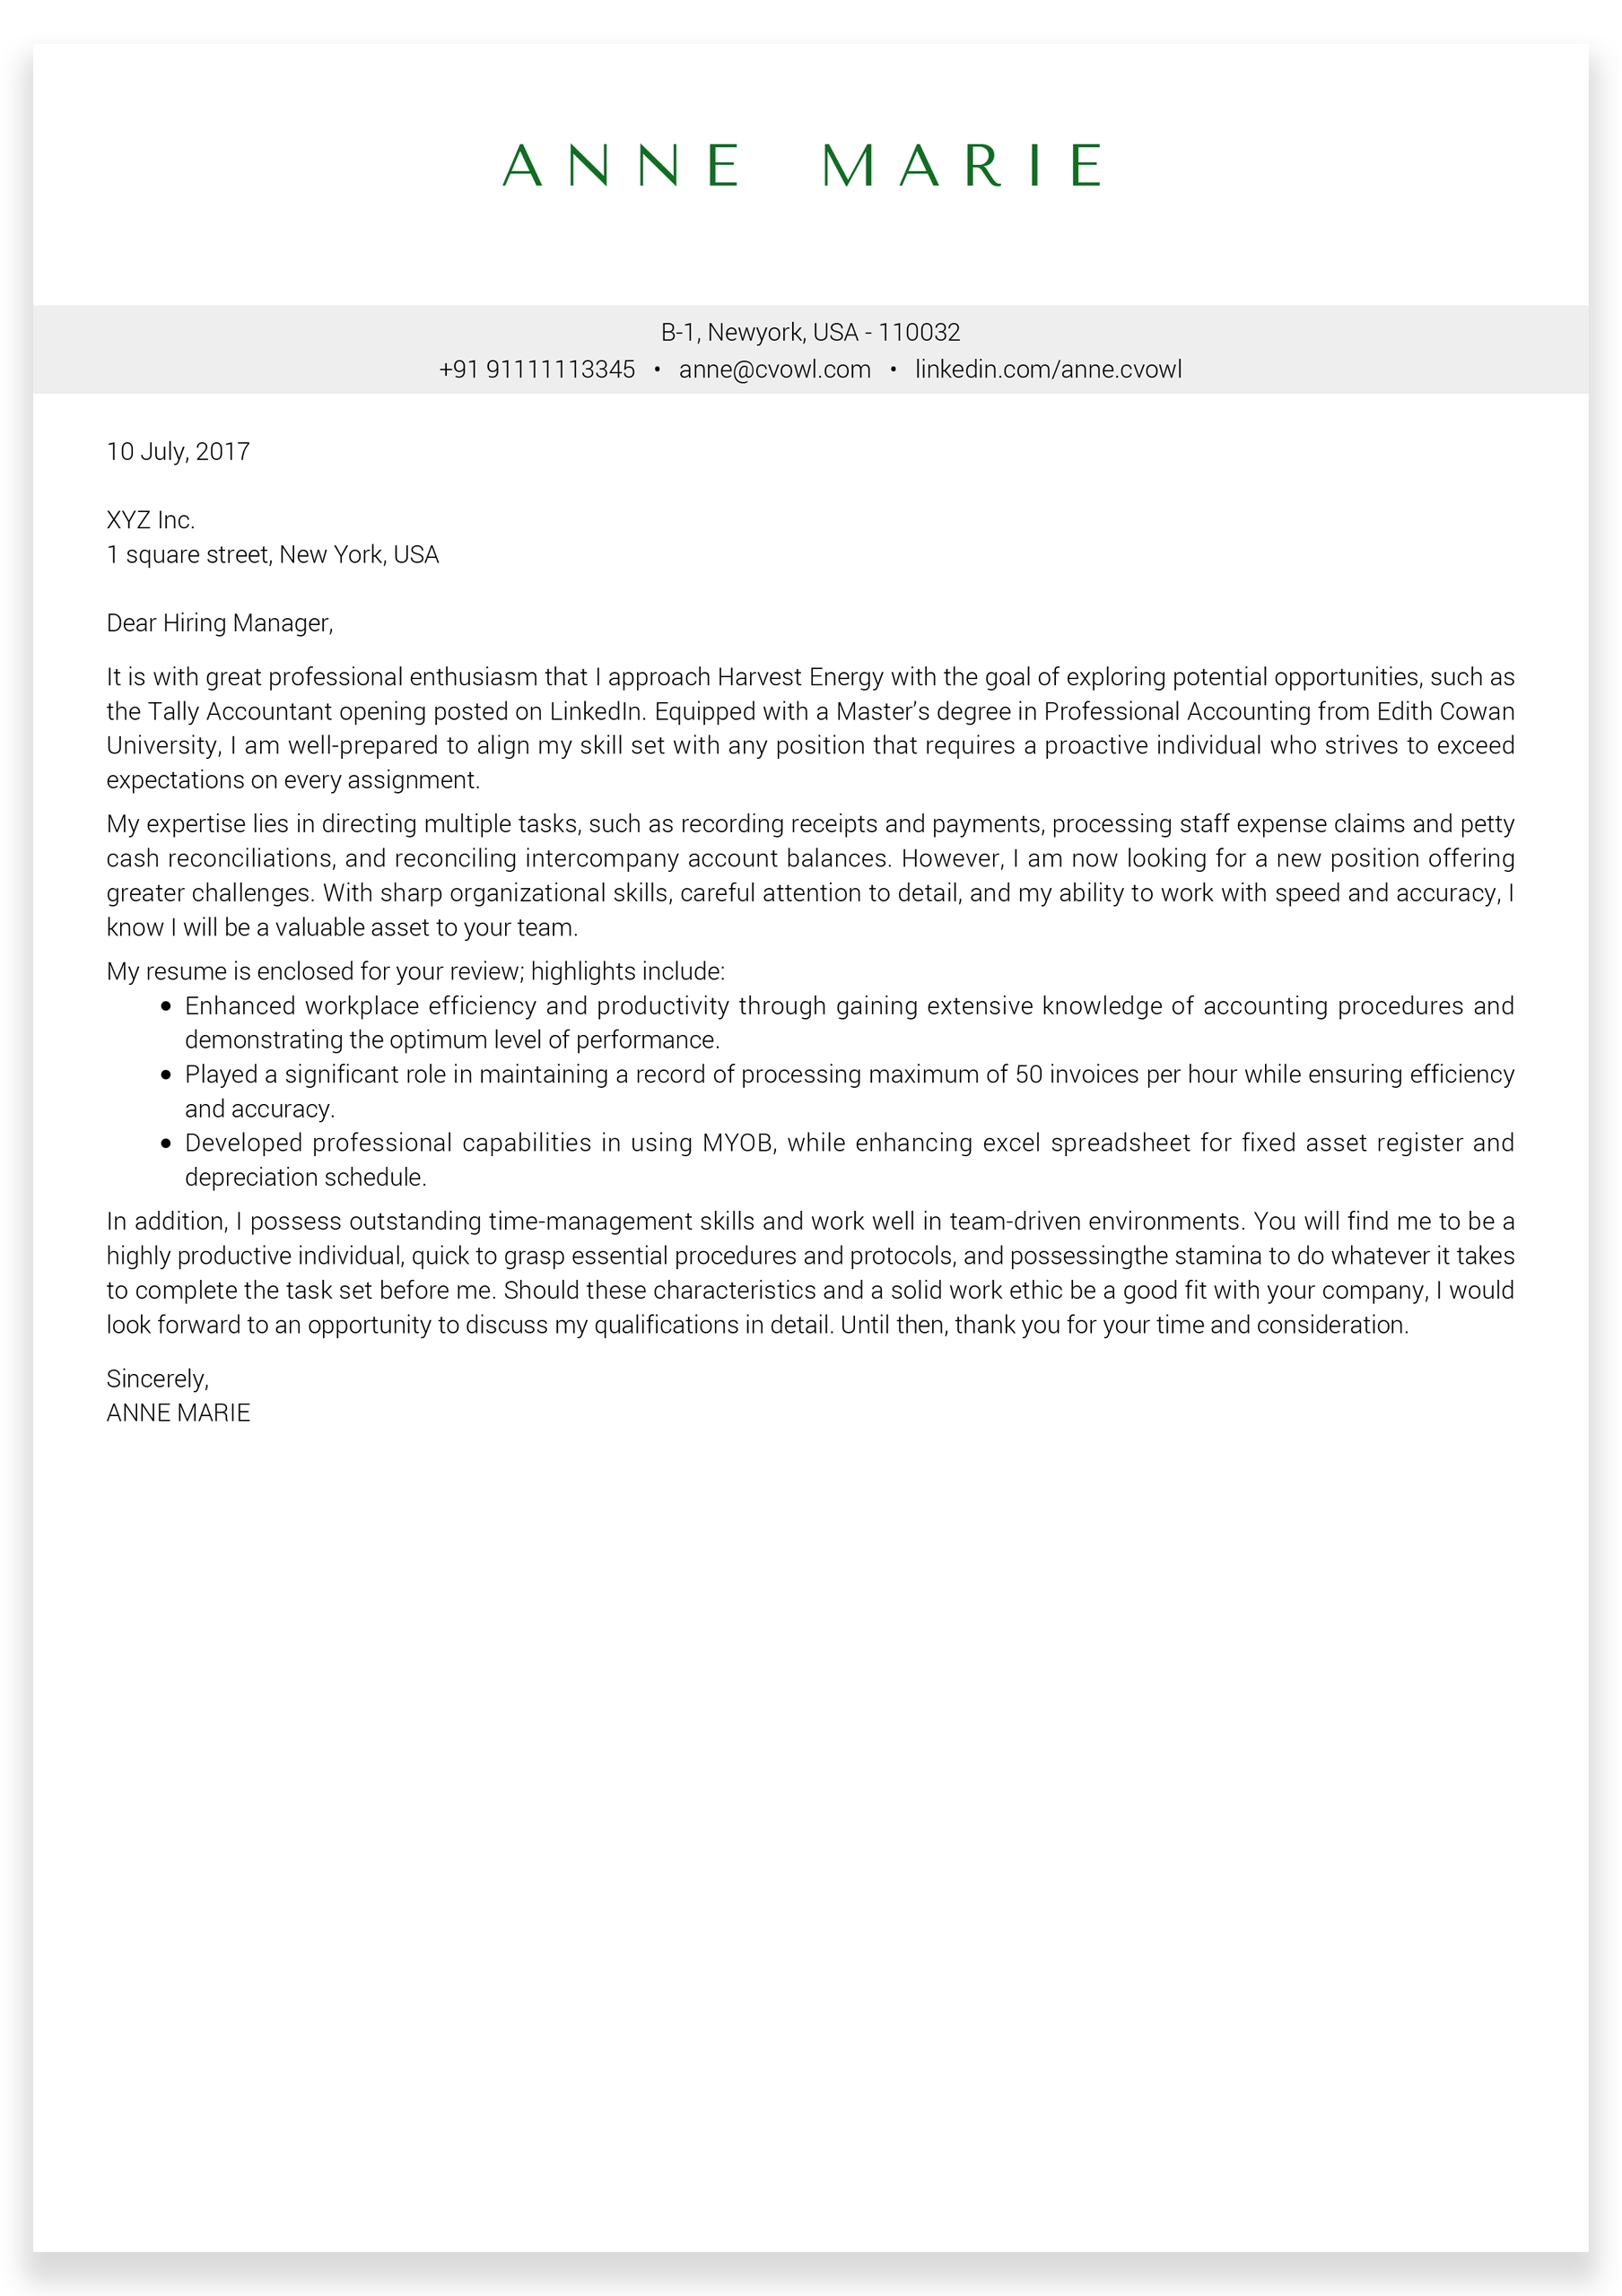 Fabrication-Engineer-Cover-Letter-sample5